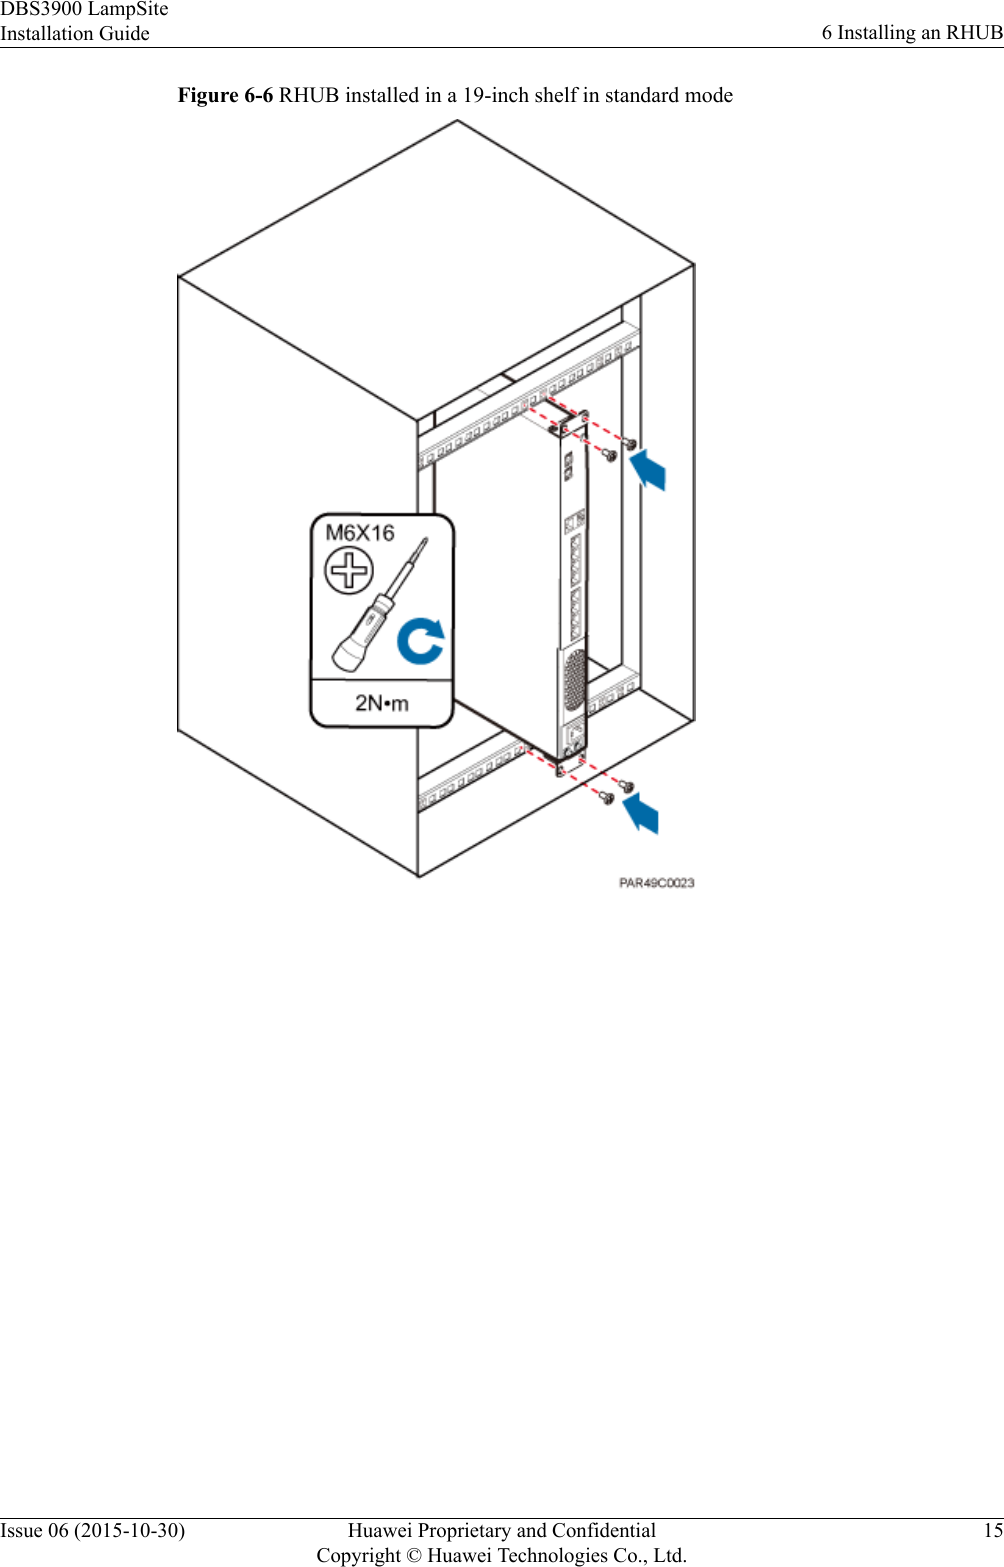 Figure 6-6 RHUB installed in a 19-inch shelf in standard modeDBS3900 LampSiteInstallation Guide 6 Installing an RHUBIssue 06 (2015-10-30) Huawei Proprietary and ConfidentialCopyright © Huawei Technologies Co., Ltd.15